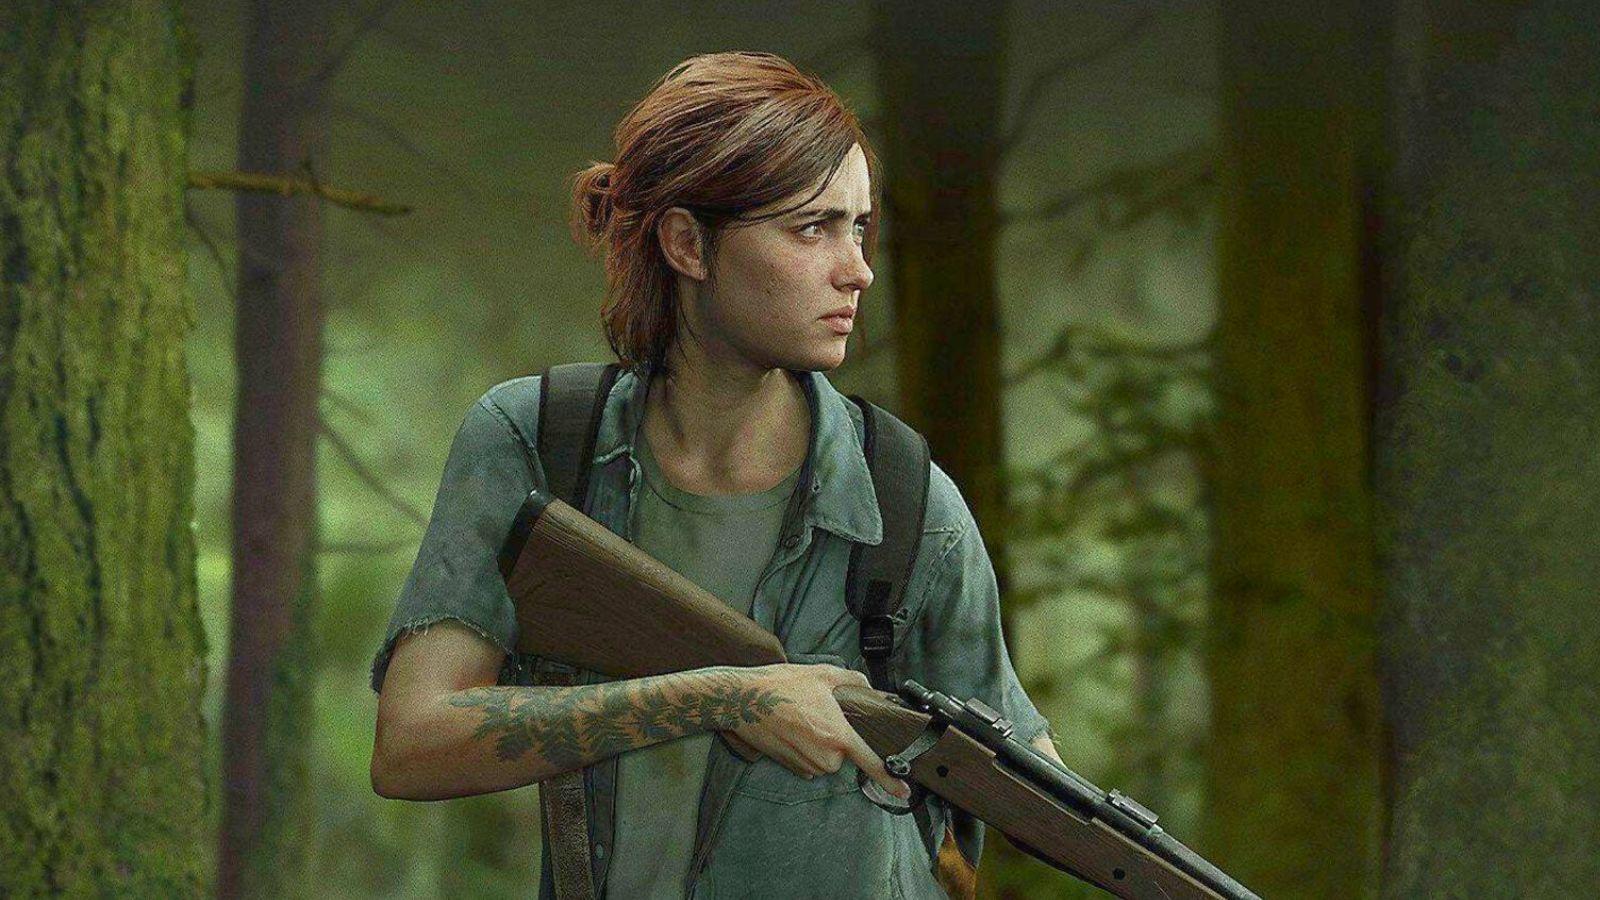 Will There Be a Last of Us 3? There's Hope Yet for Neil Druckmann's Story